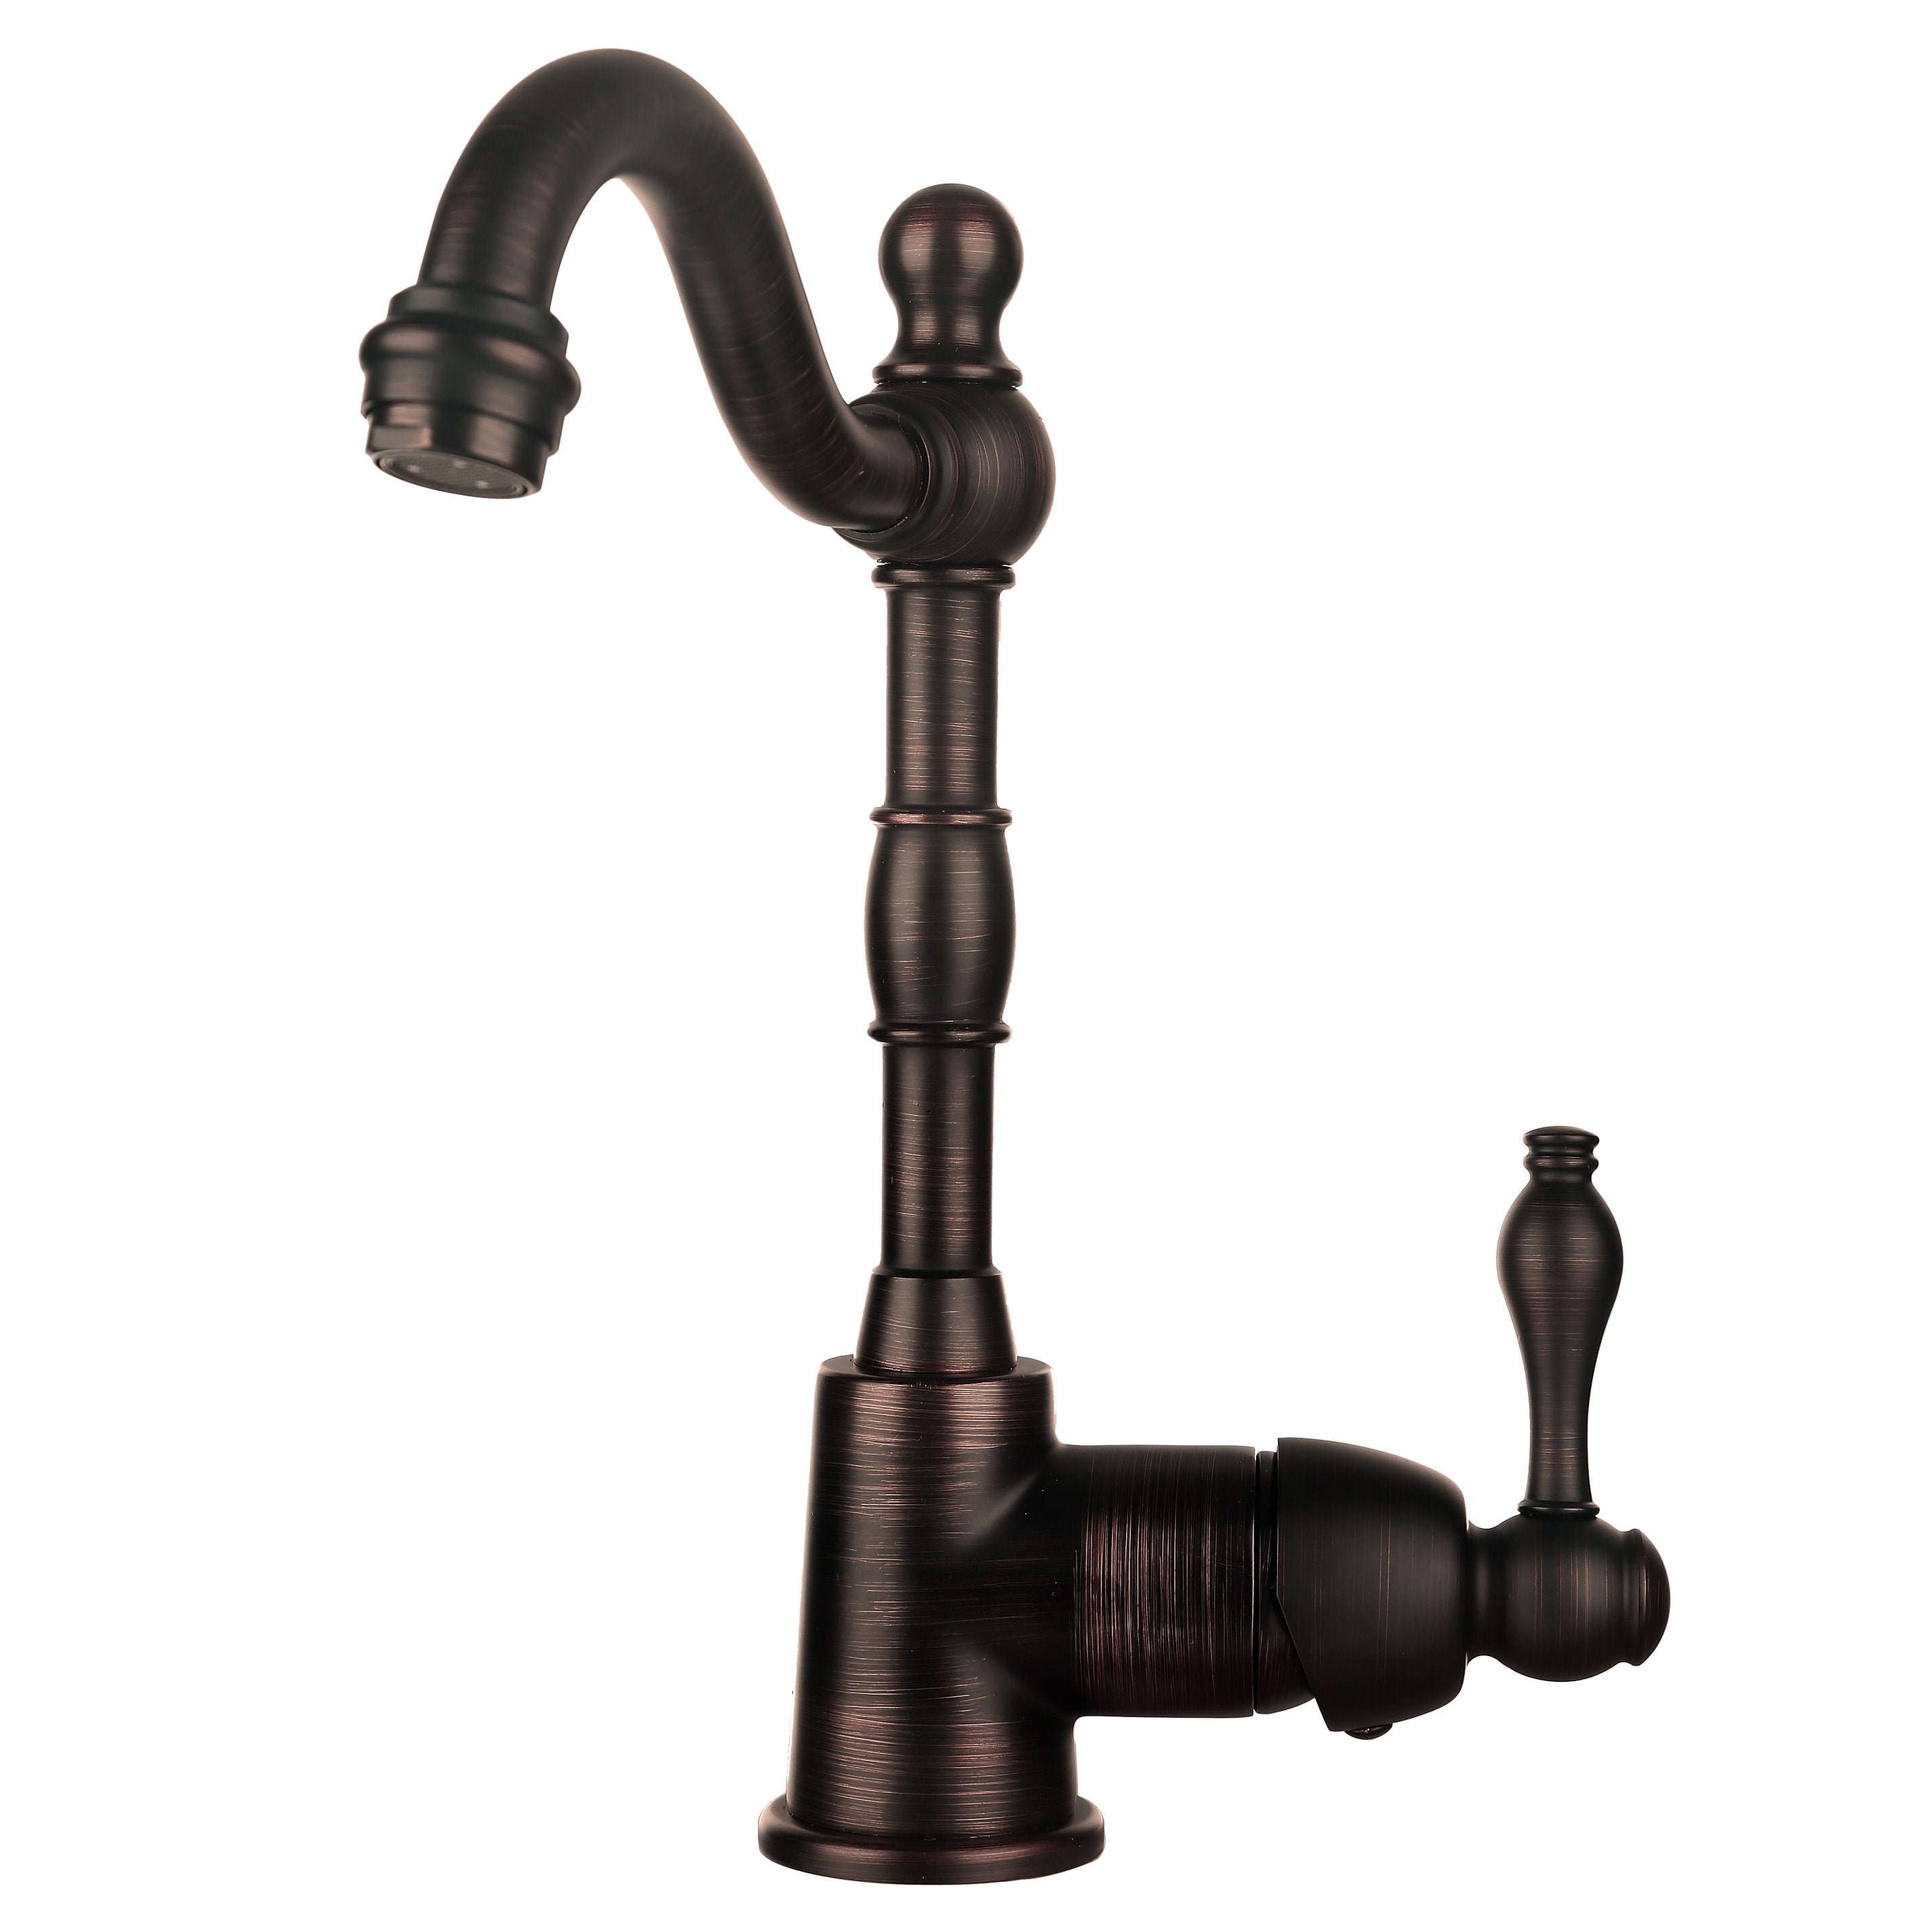 Premier Copper Products - BSP4_BR16DB Bar/Prep Sink, Faucet and Accessories Package-DirectSinks